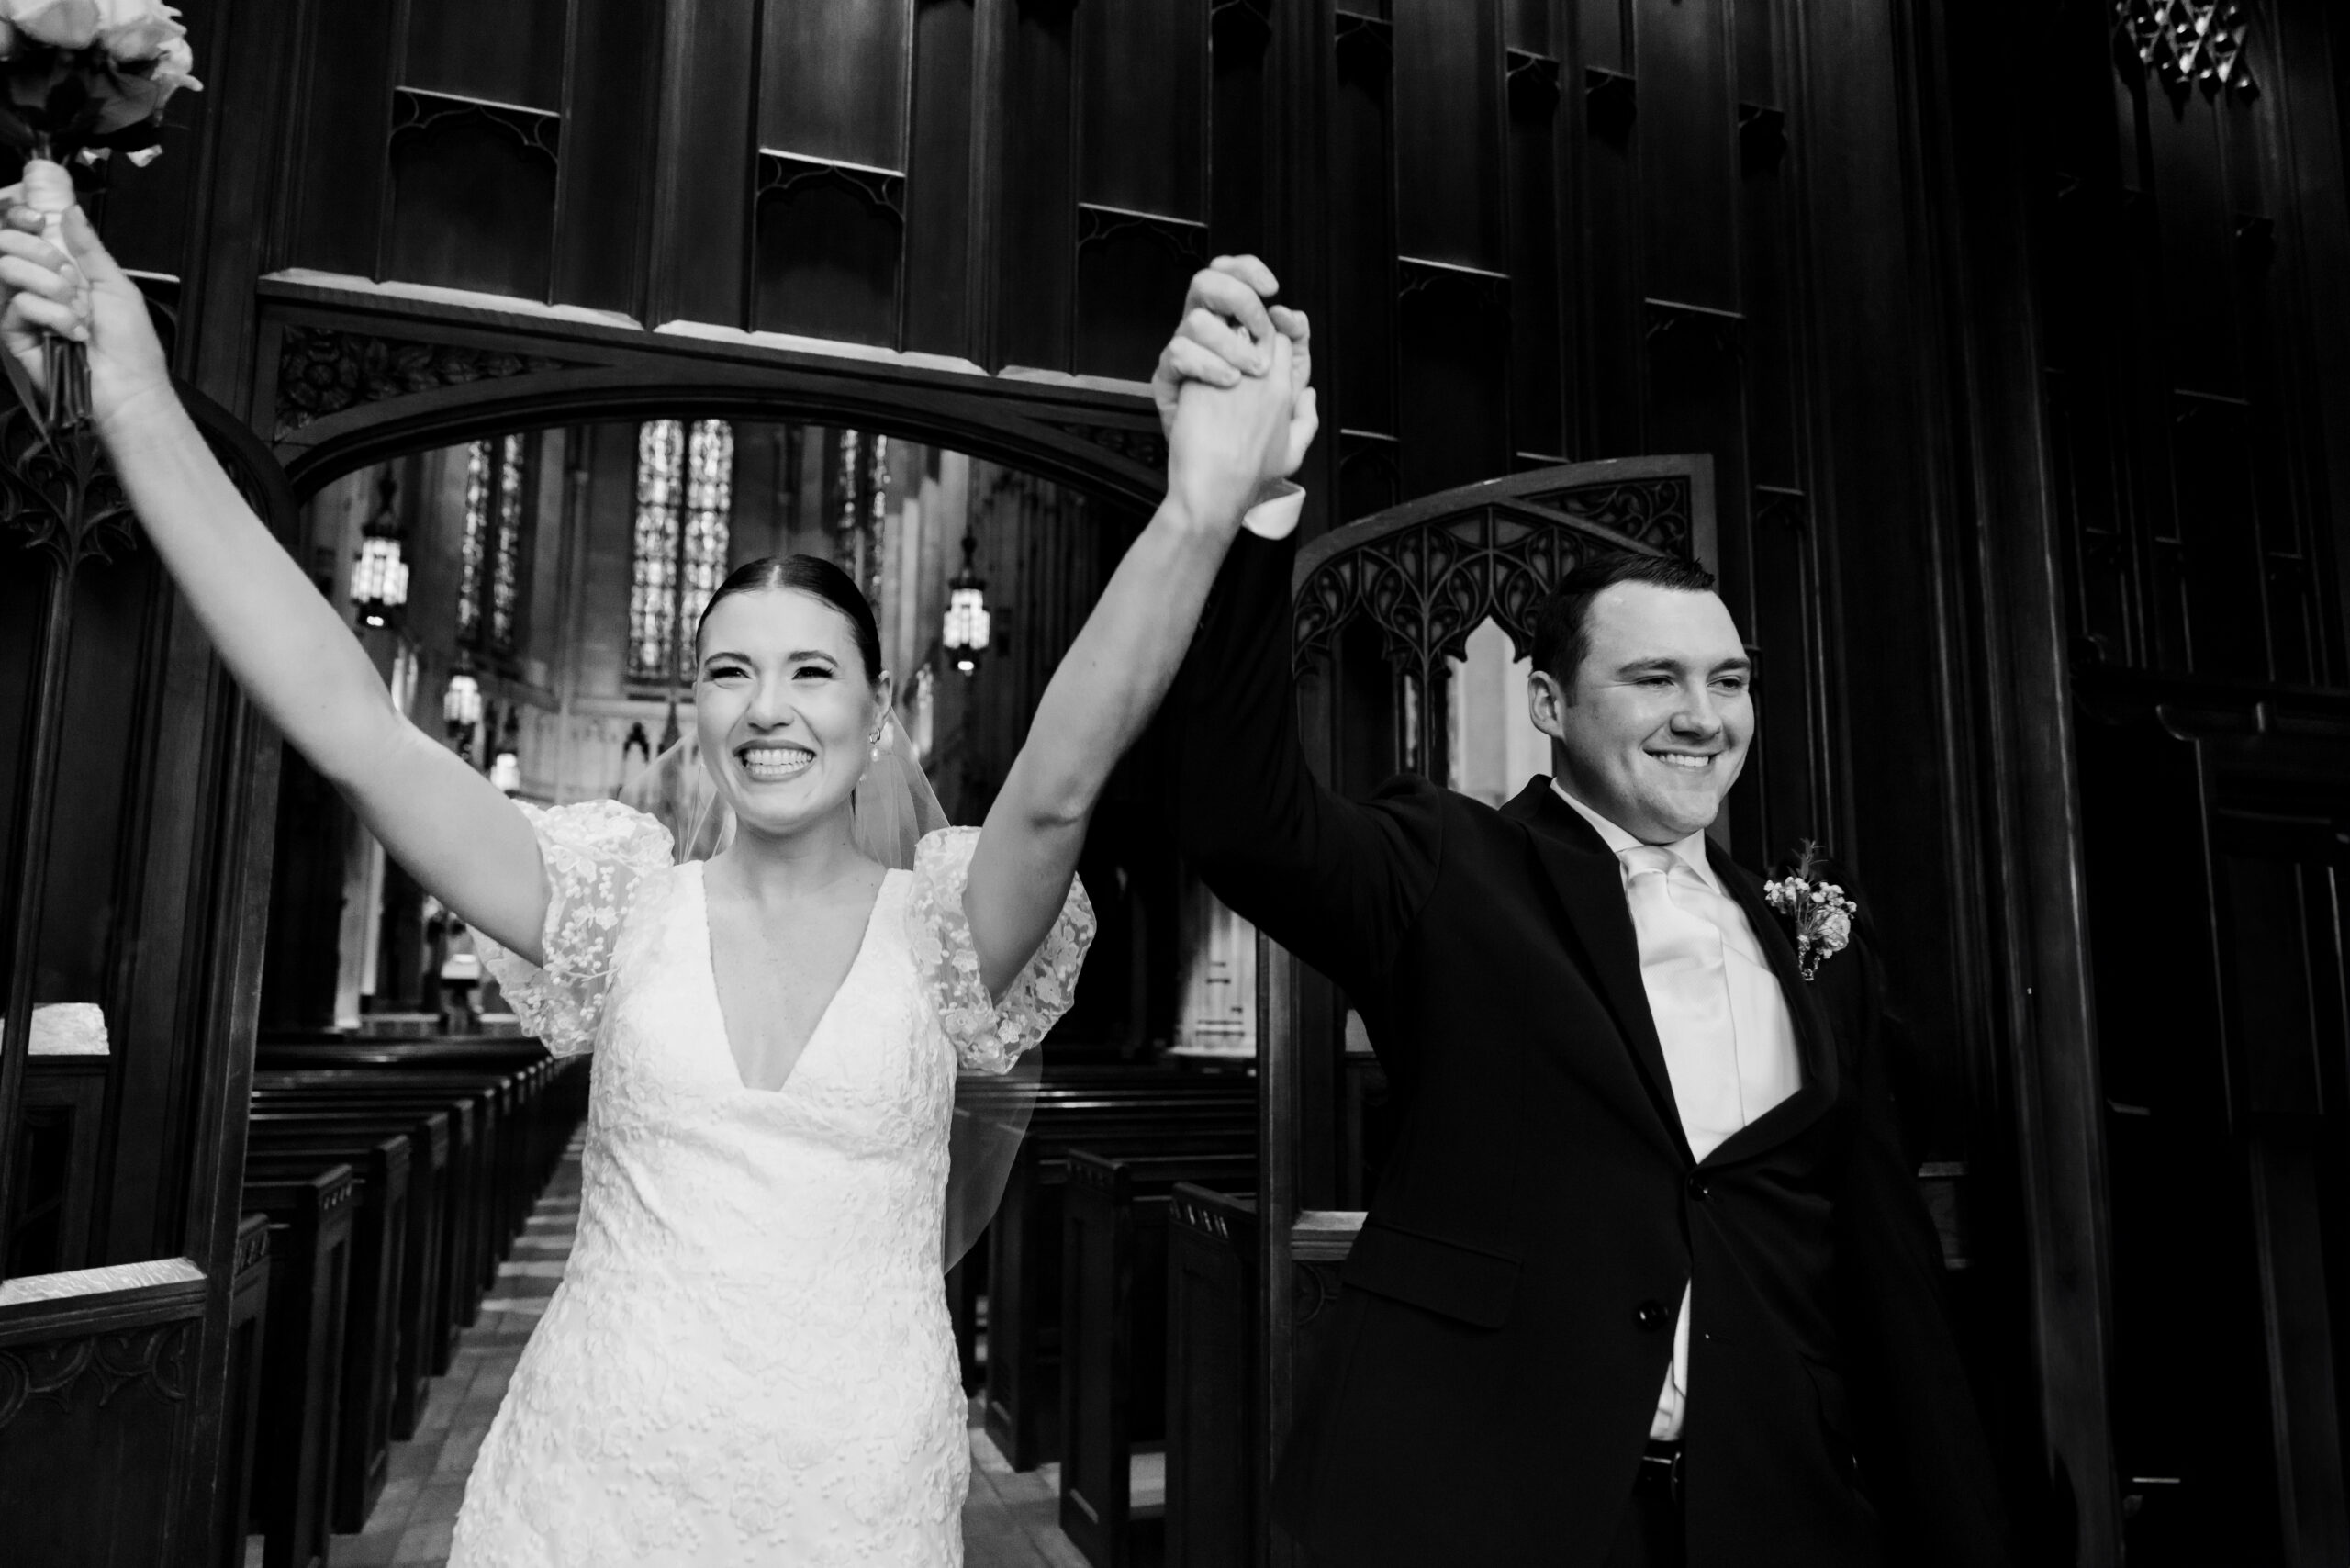 Groom and bride celebrate with family and friends as their exit Heinz Chapel in Pittsburgh on their wedding day. Photo taken by Pittsburgh Wedding Photographer Aaron Aldhizer